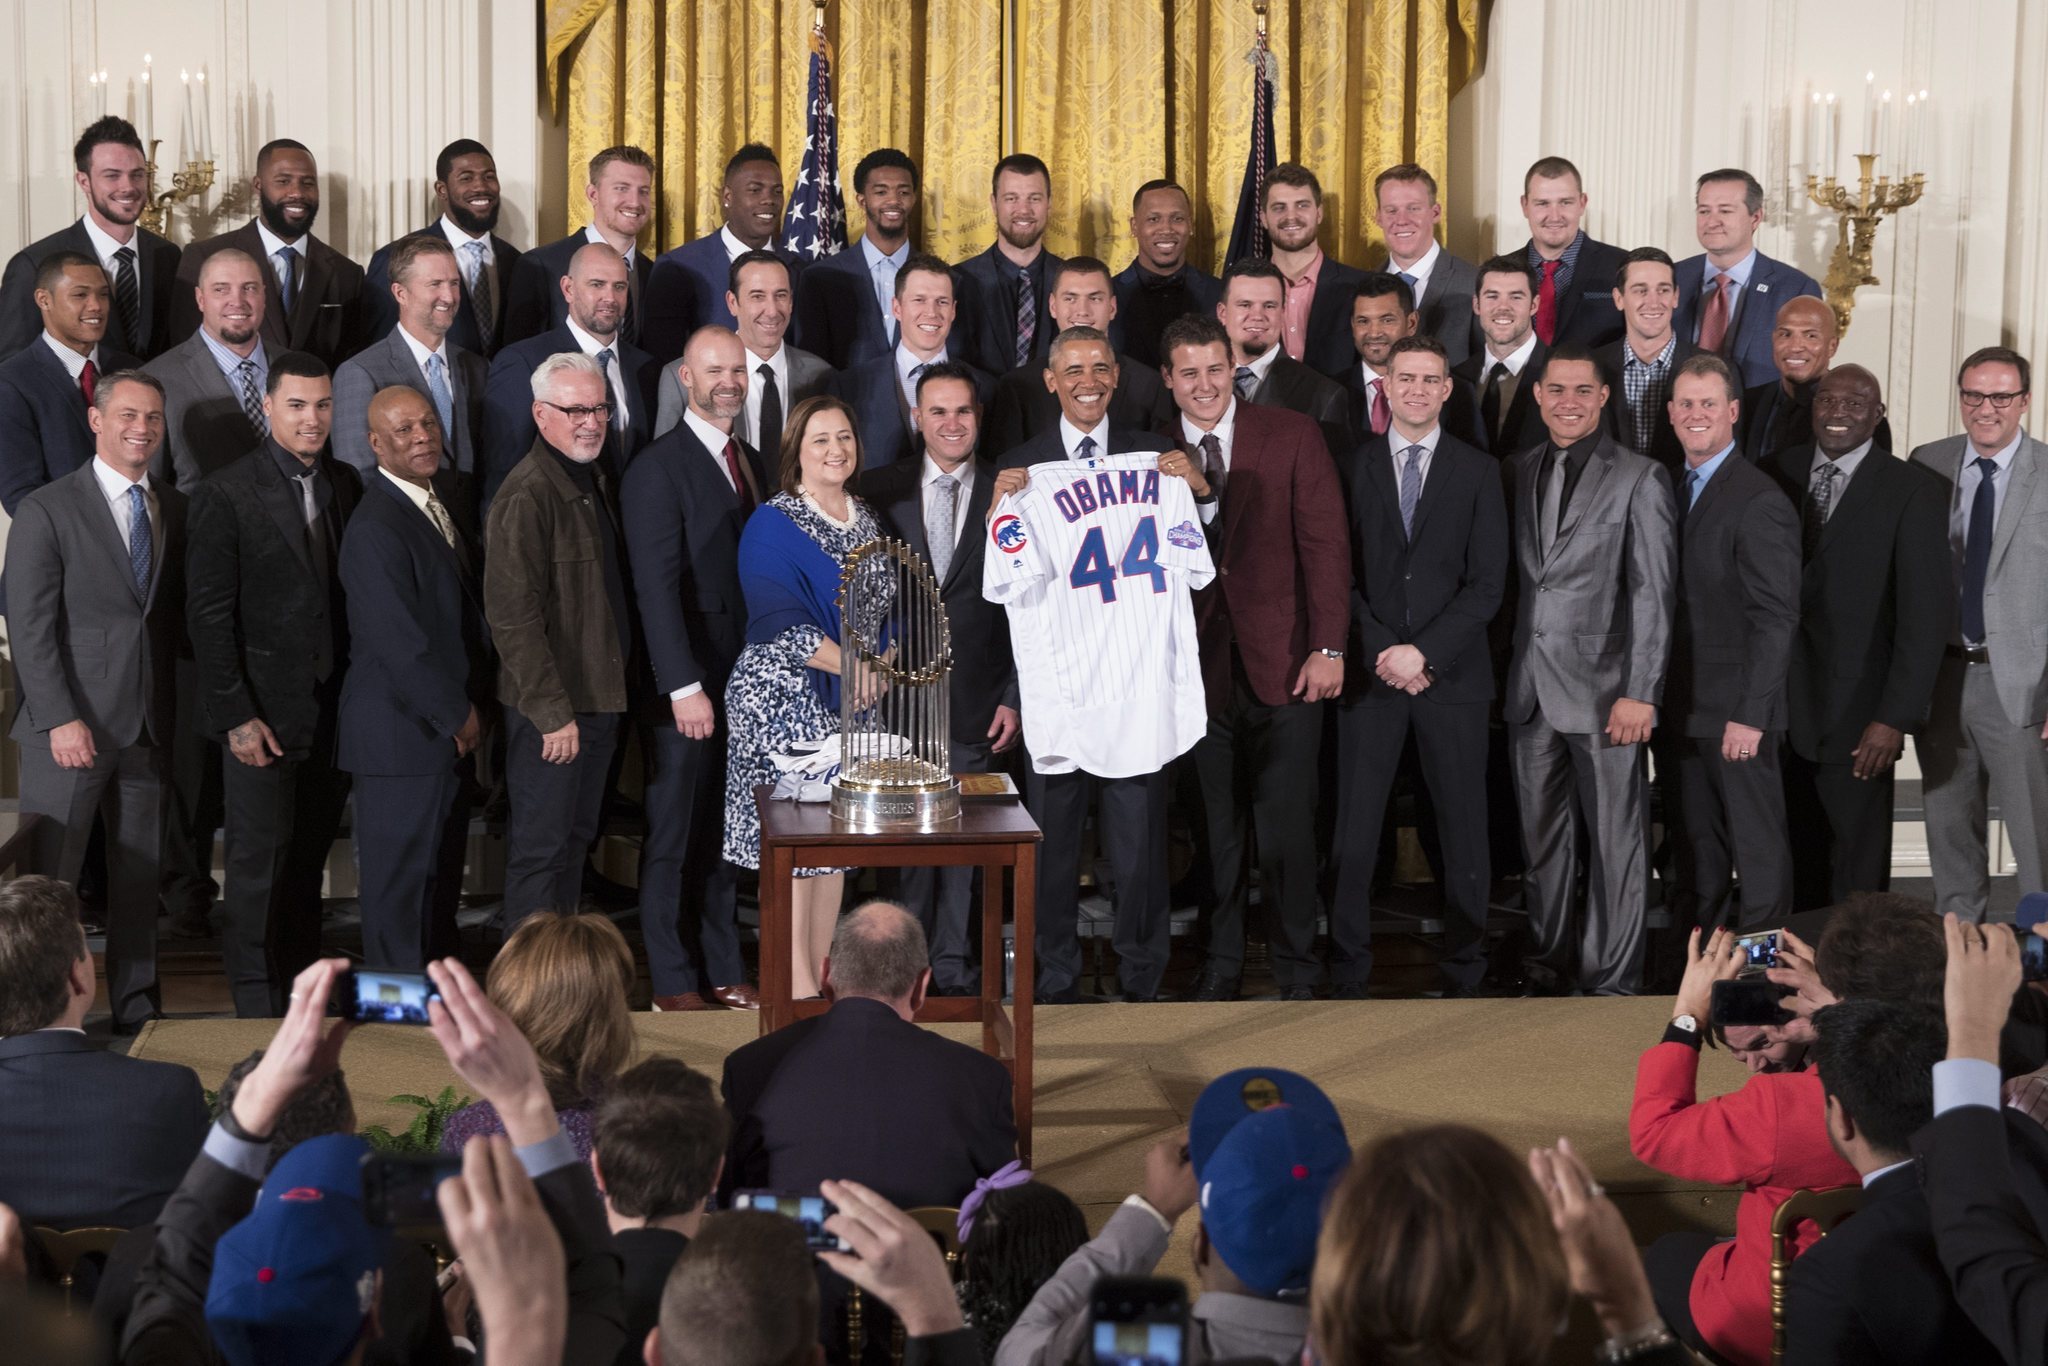 Live updates: Cubs head to the White House for World Series visit